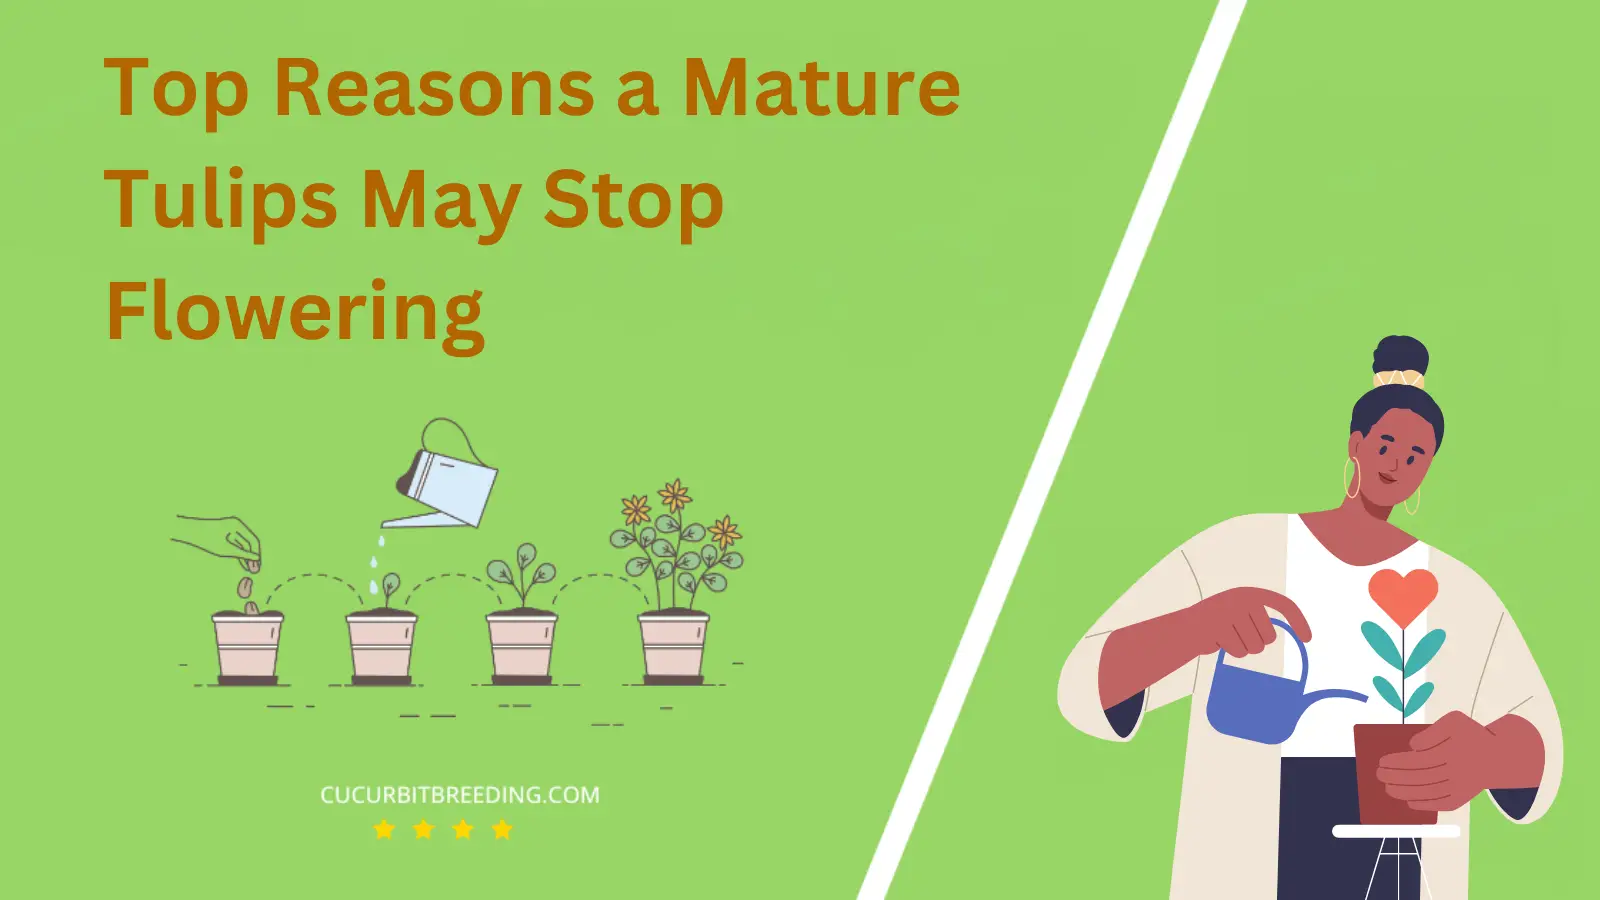 Top Reasons a Mature Tulips May Stop Flowering